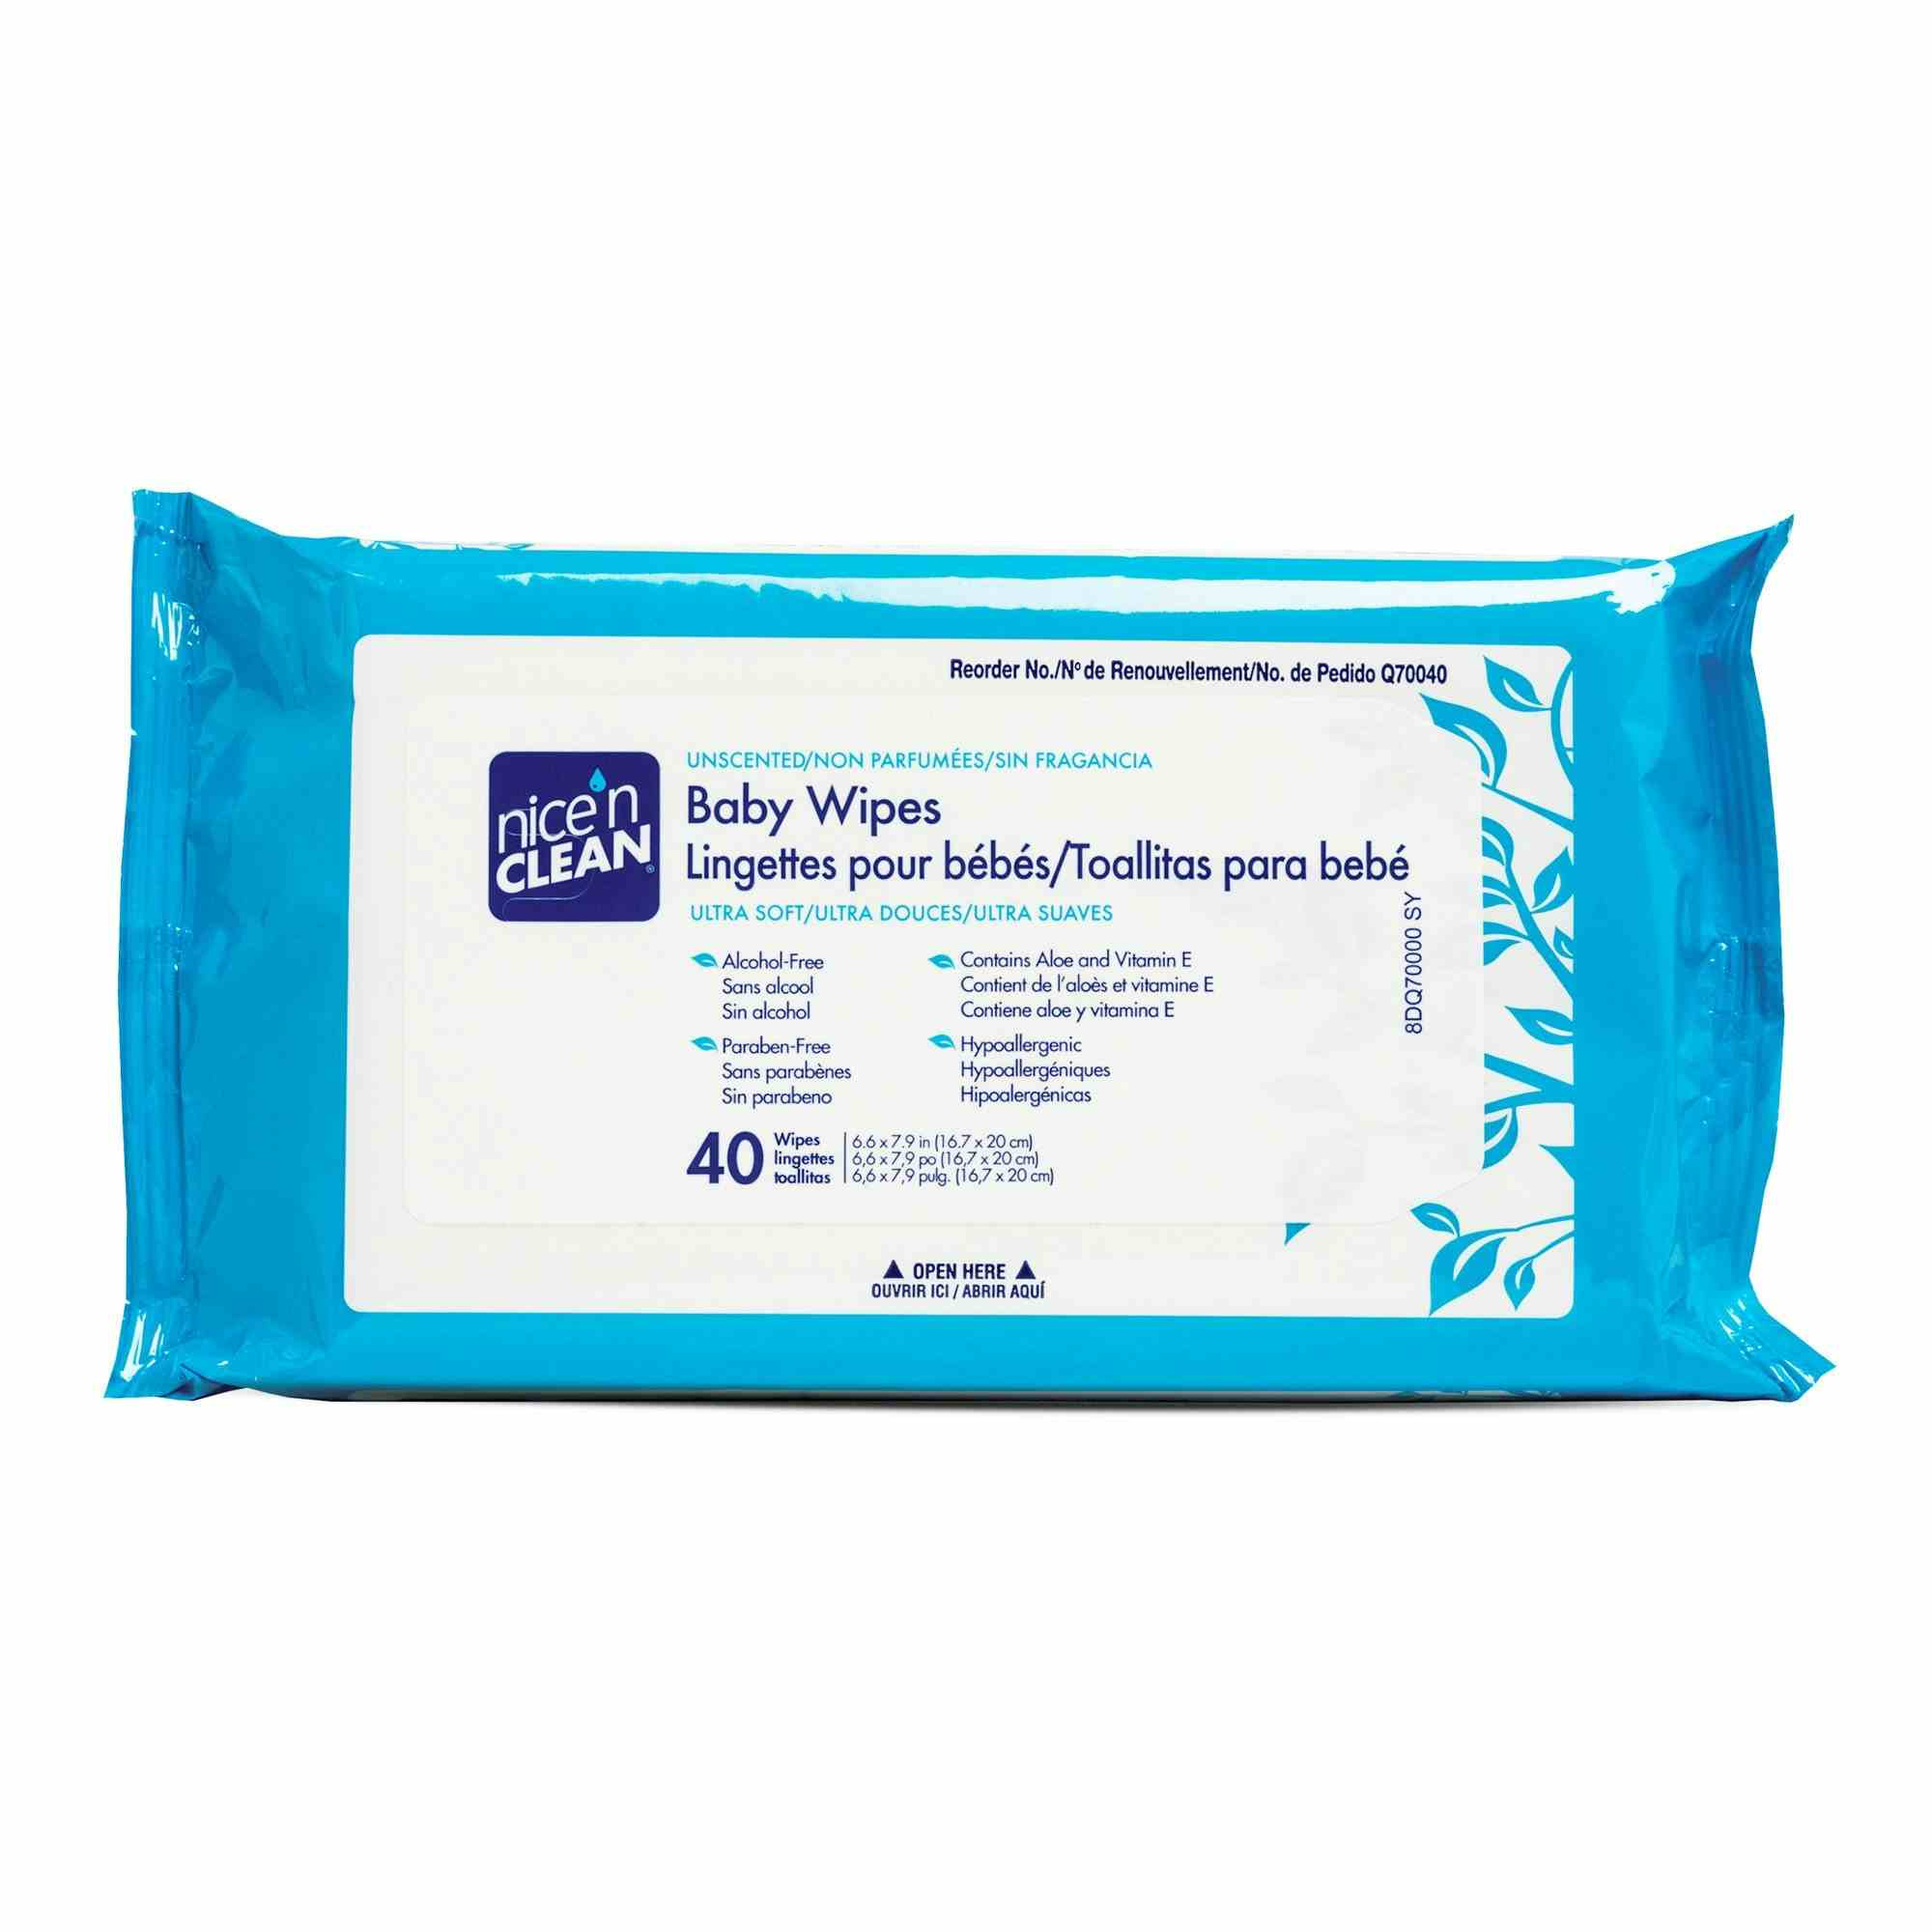 Nice’n Clean Baby Wipes, Unscented, Q70040, Box of 40